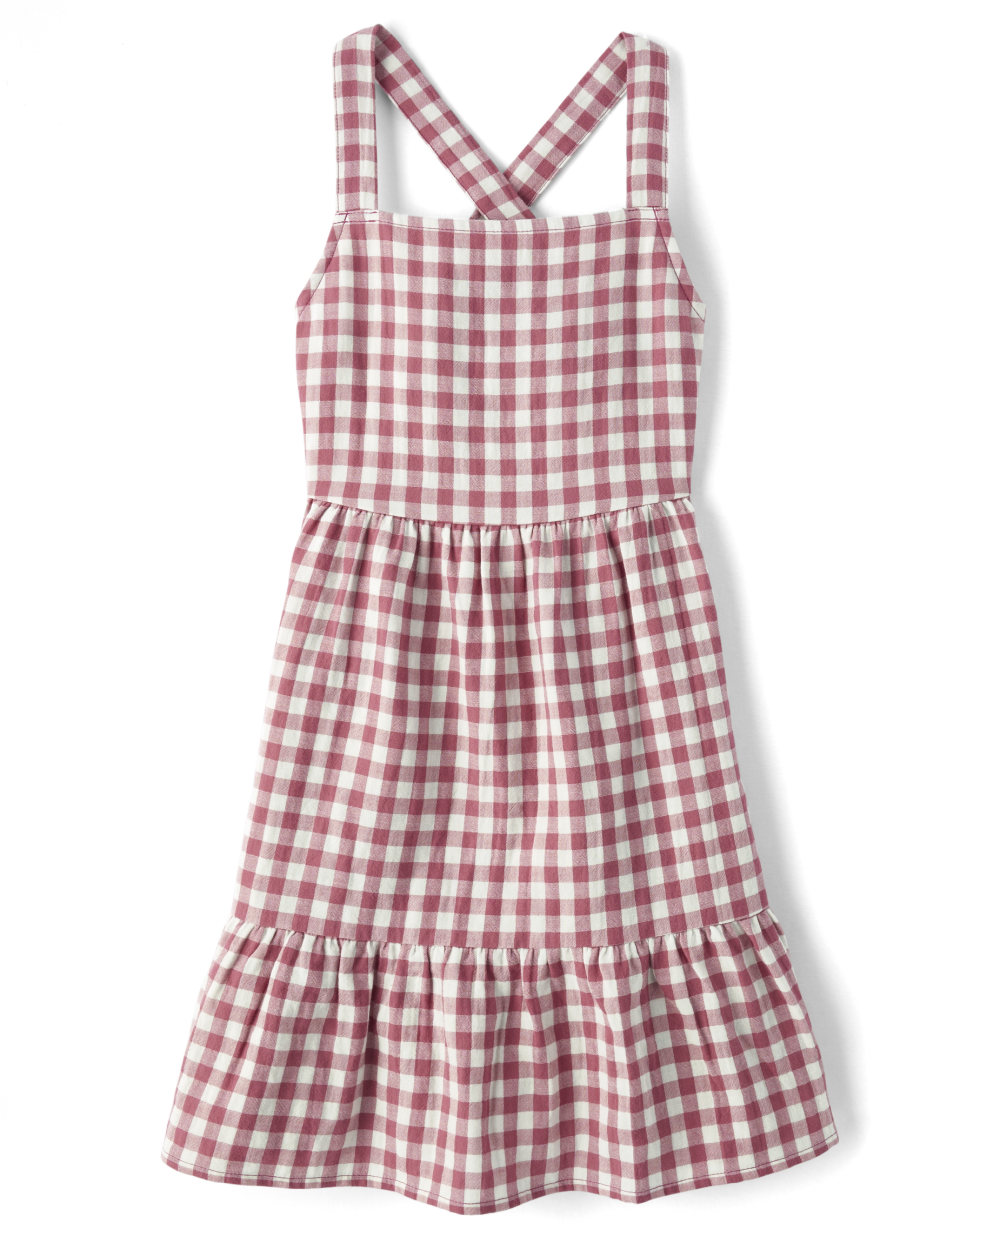 Girls Square Neck Above the Knee Sleeveless Checkered Gingham Print Dress With Ruffles